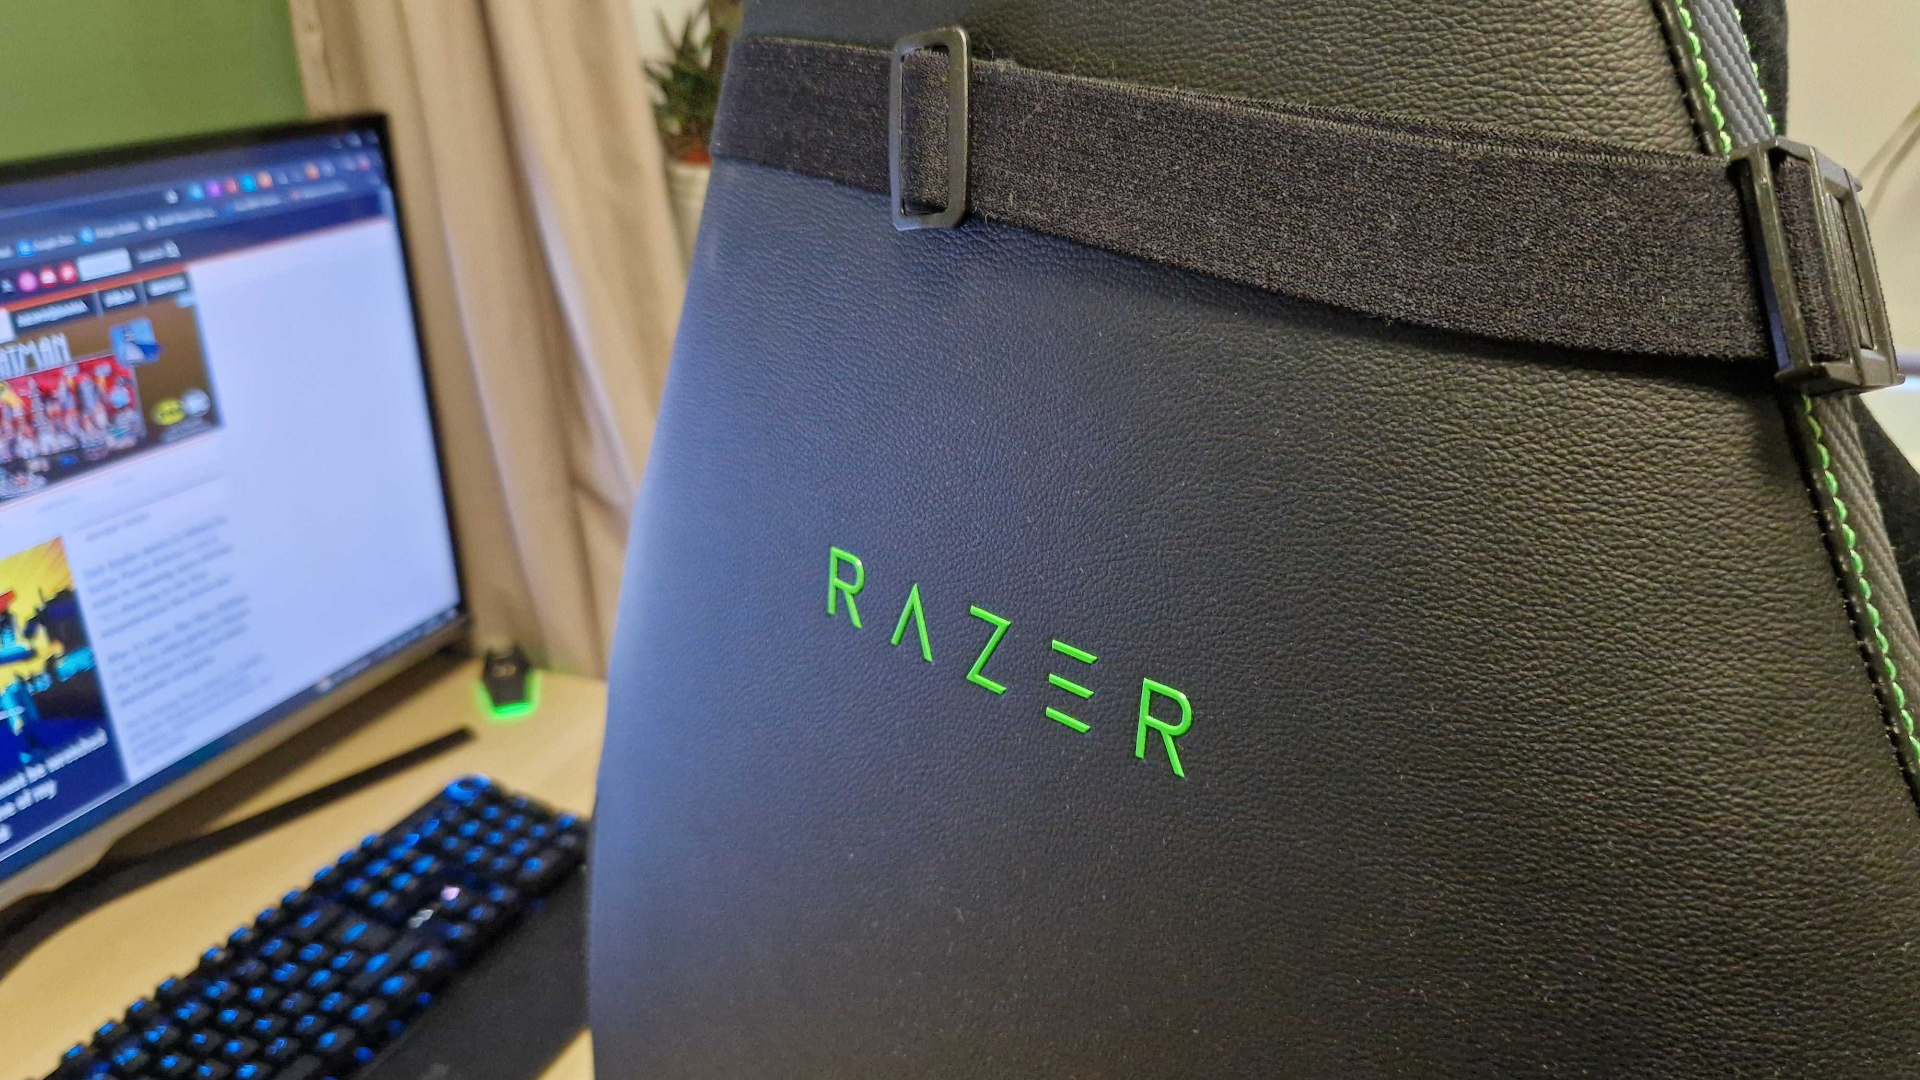 Razer Iskur V2 chair seen from behind, with a prominent Razer logo on its back